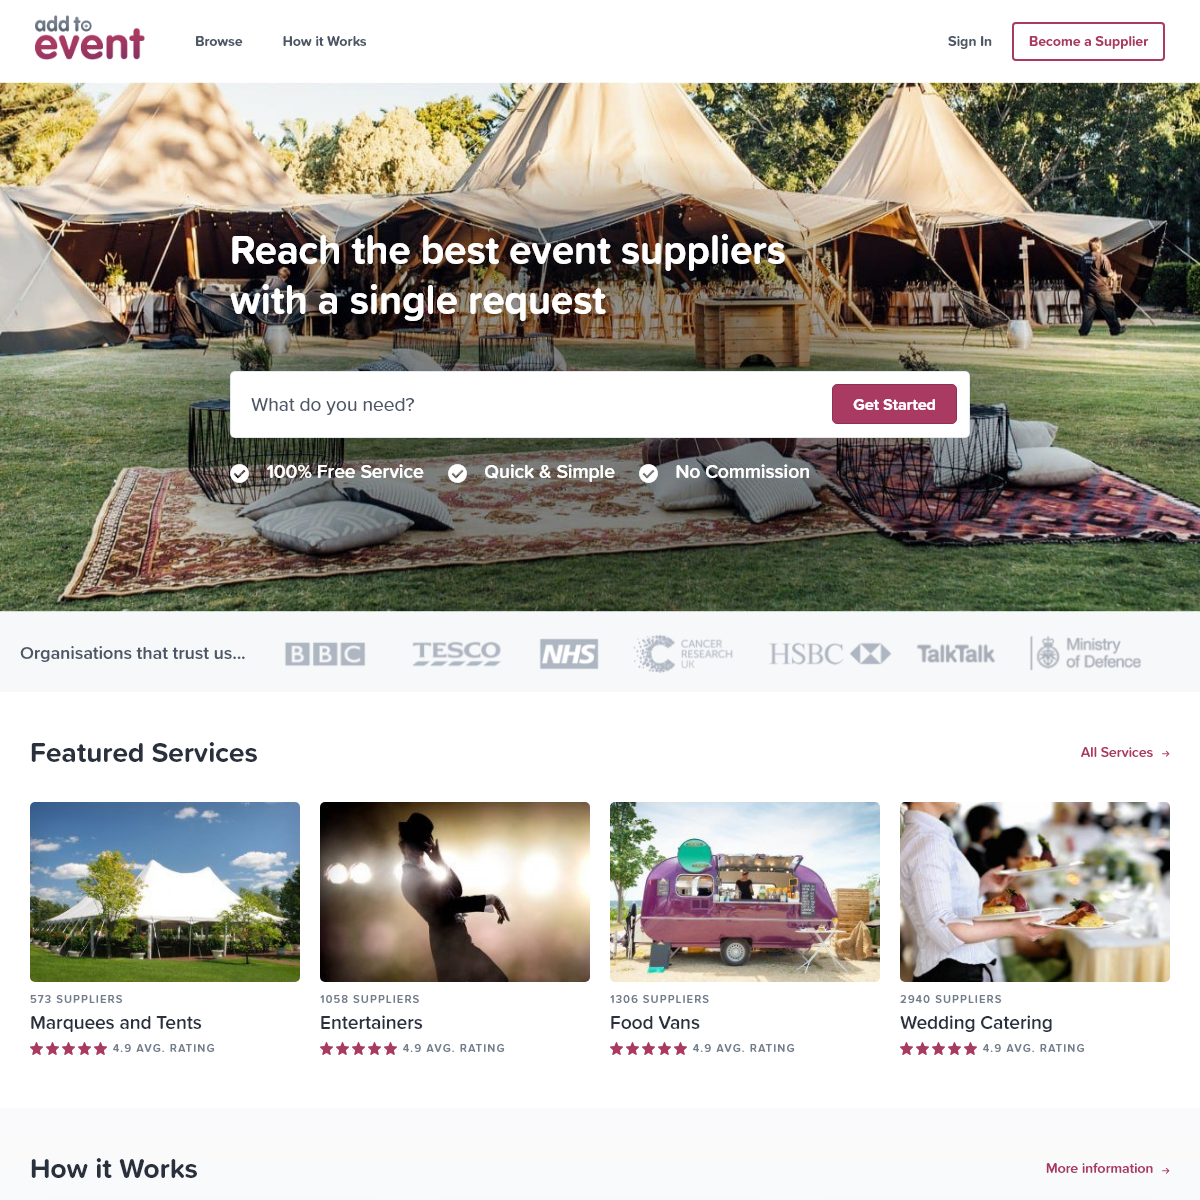 Add to Event - Find and book the best suppliers for your event.